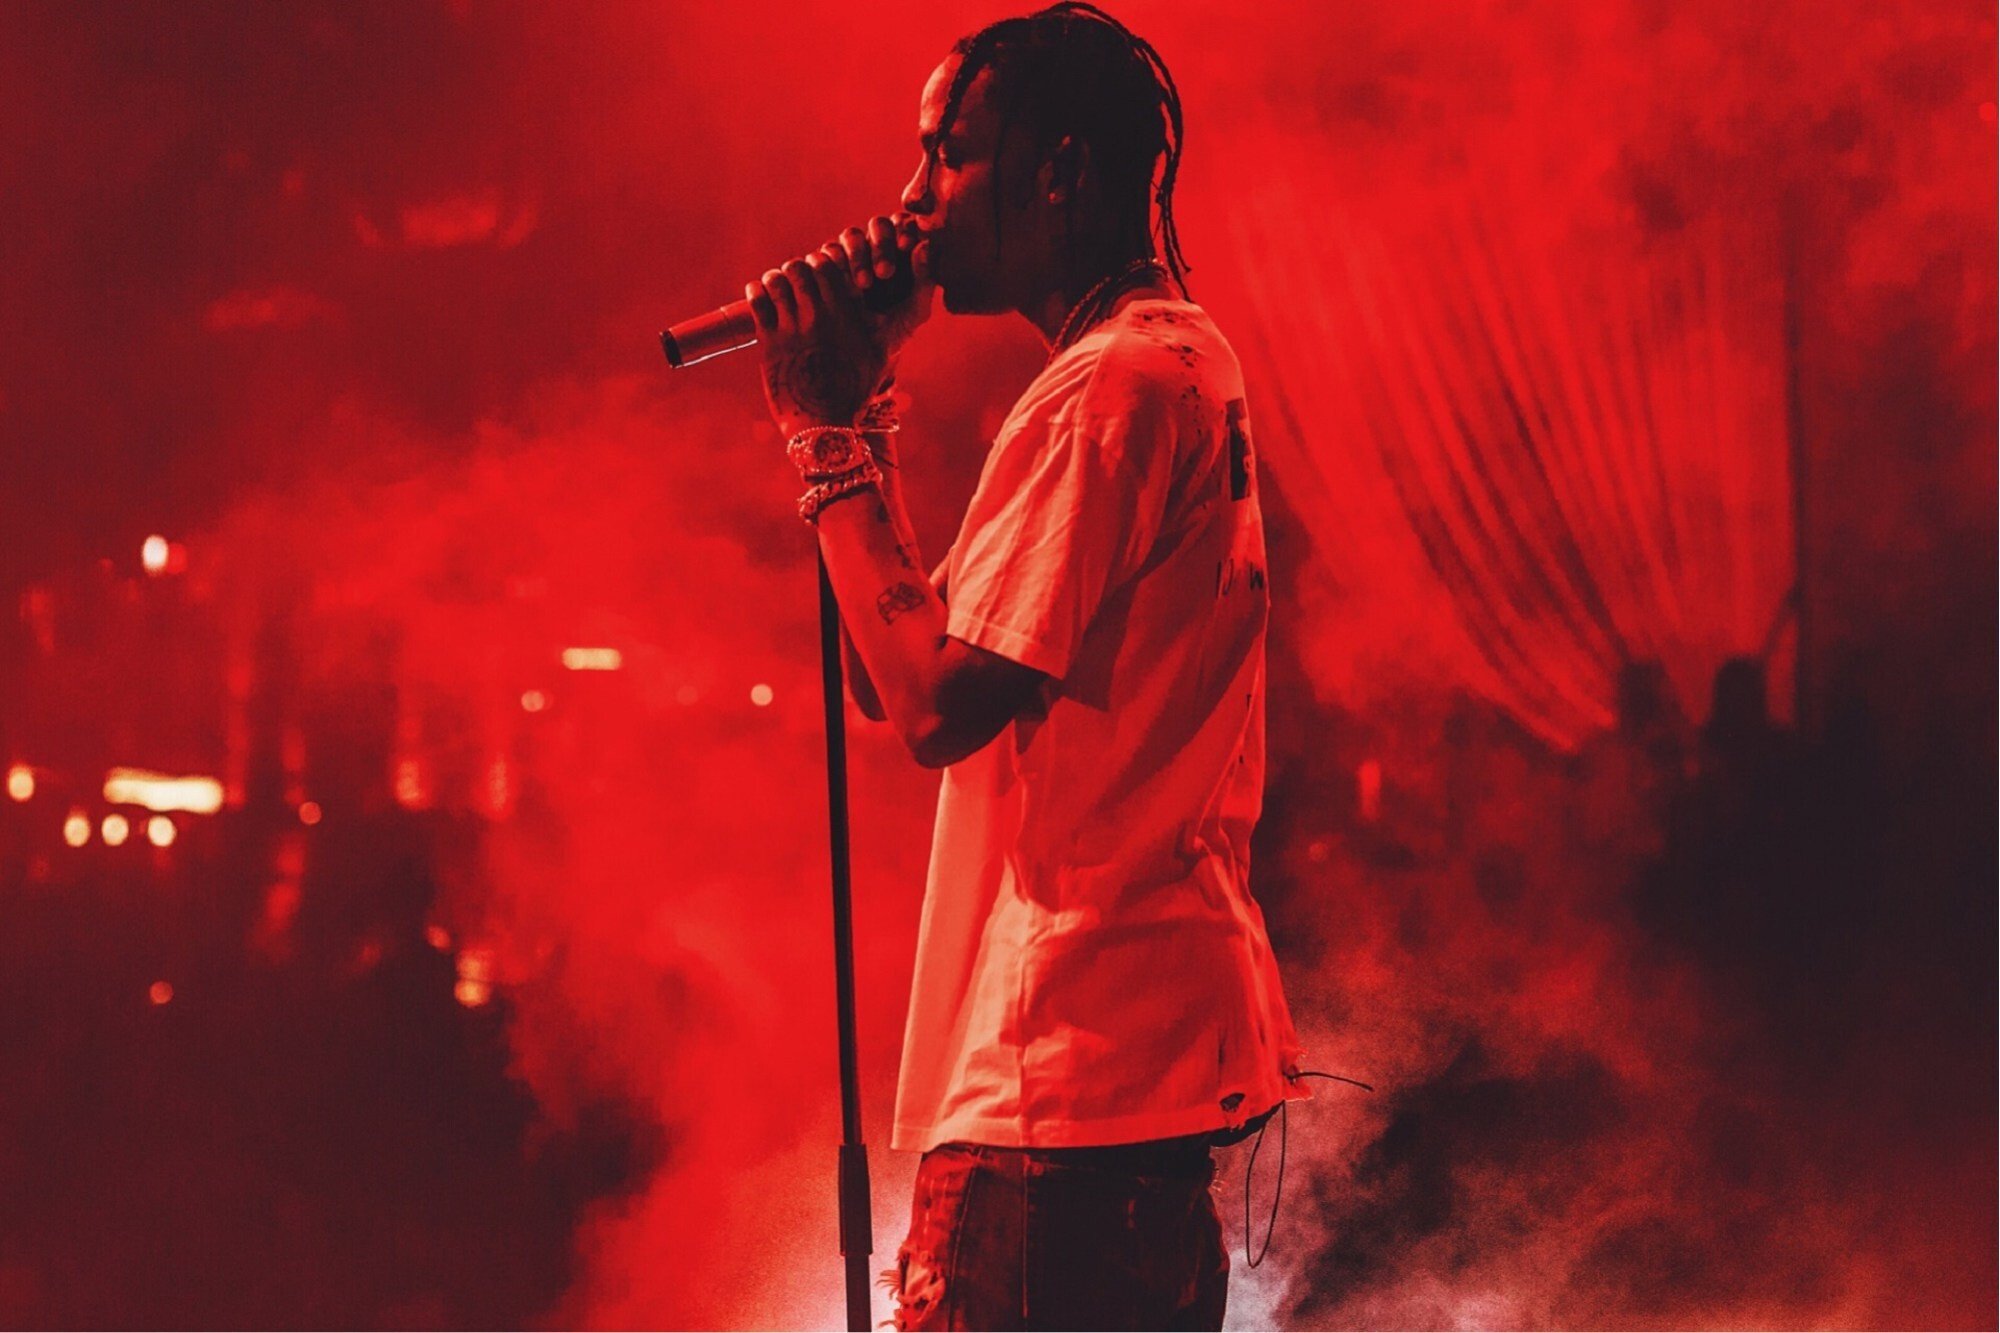 US rapper Travis Scott has a net worth of nearly US$40 million thanks to producing music, touring and making lucrative deals with the likes of Nike and McDonald’s.